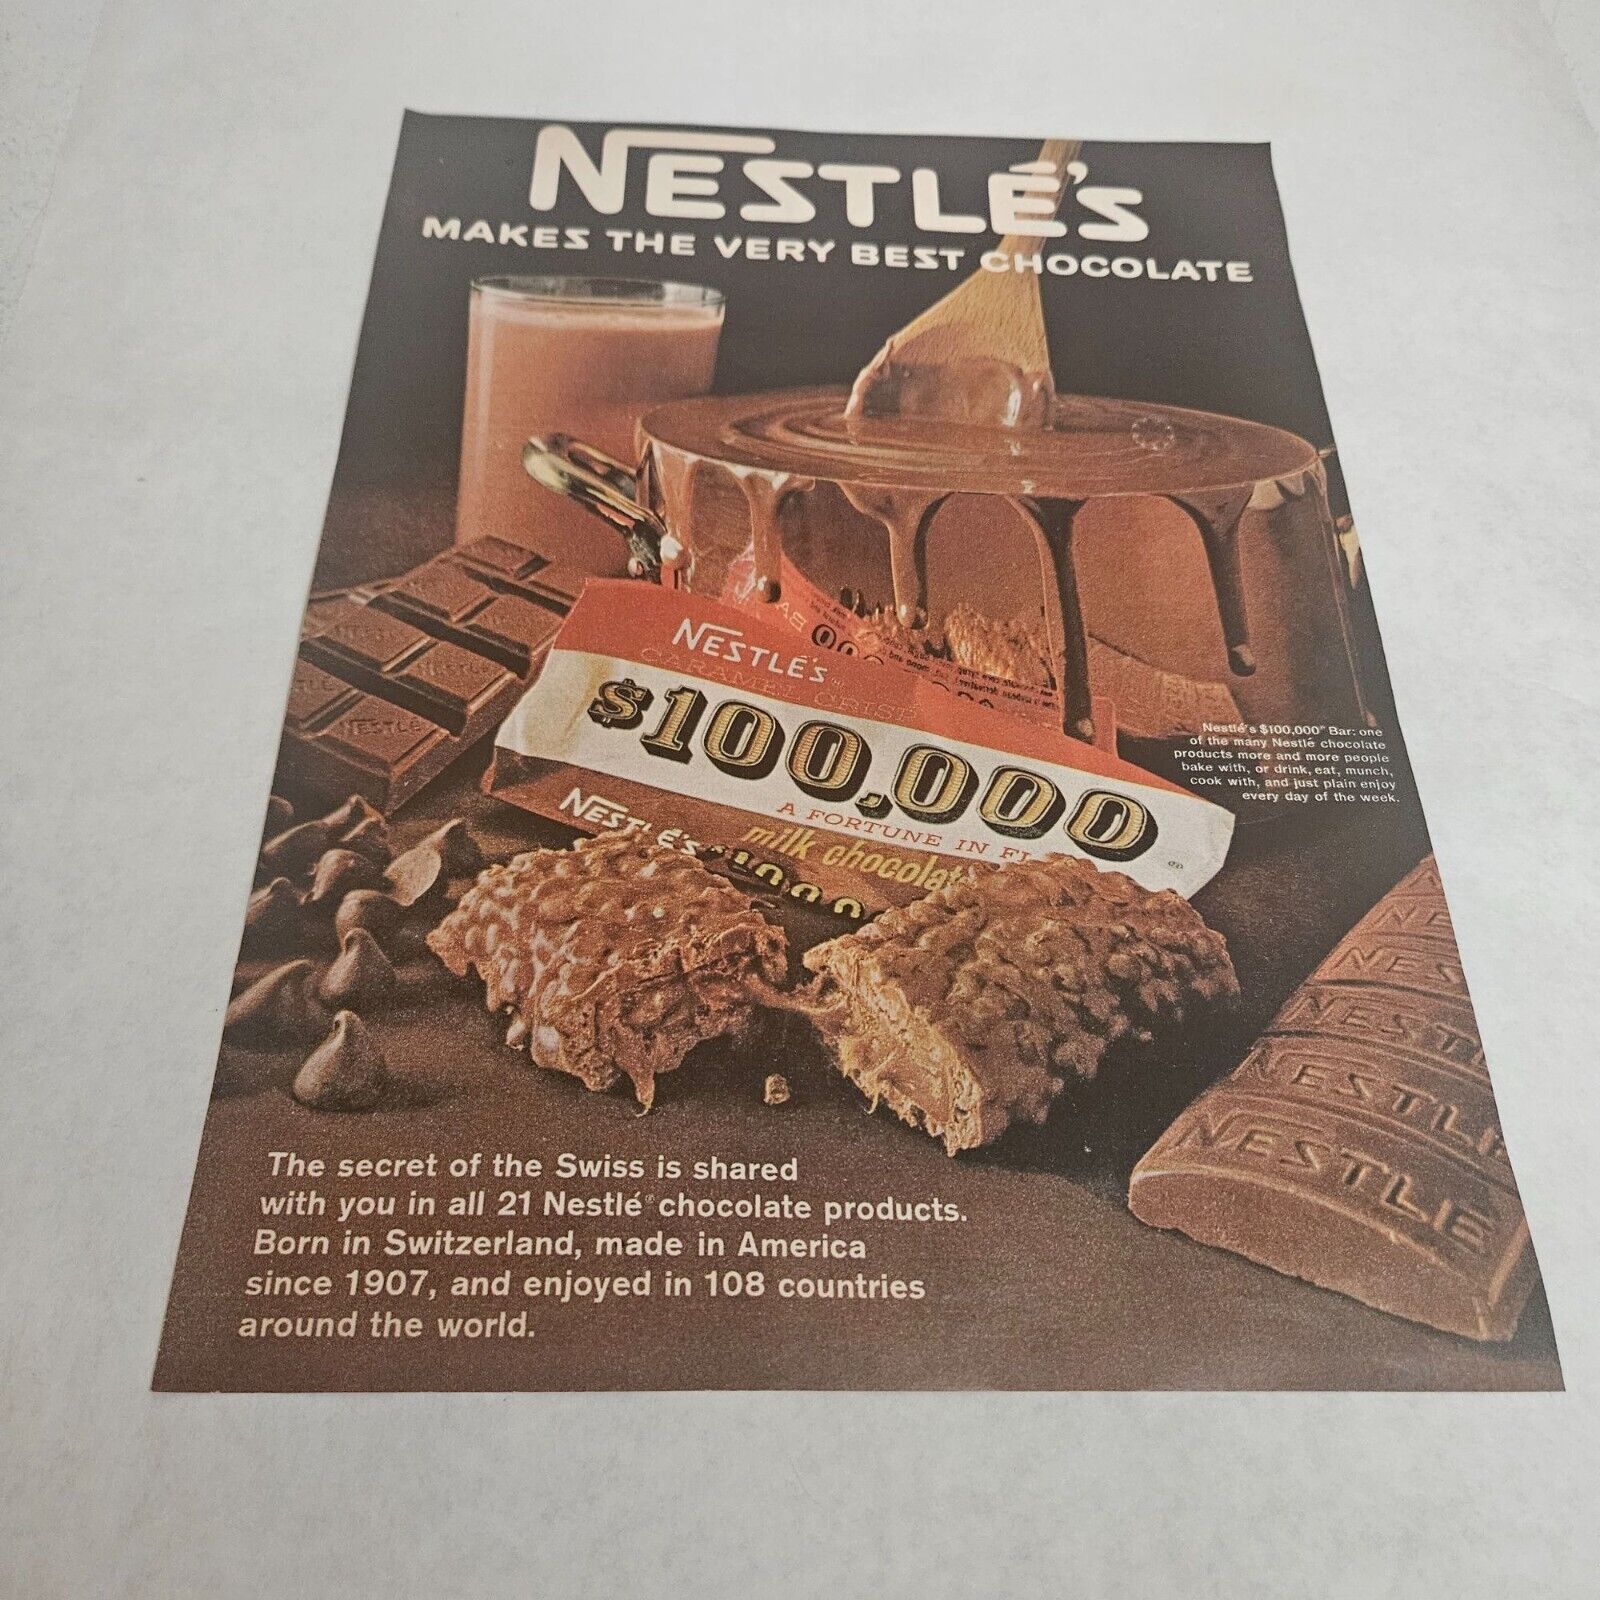 Nestle's Makes the Very Best Chocolate $100,000 Bar Vintage Print Ad 1968